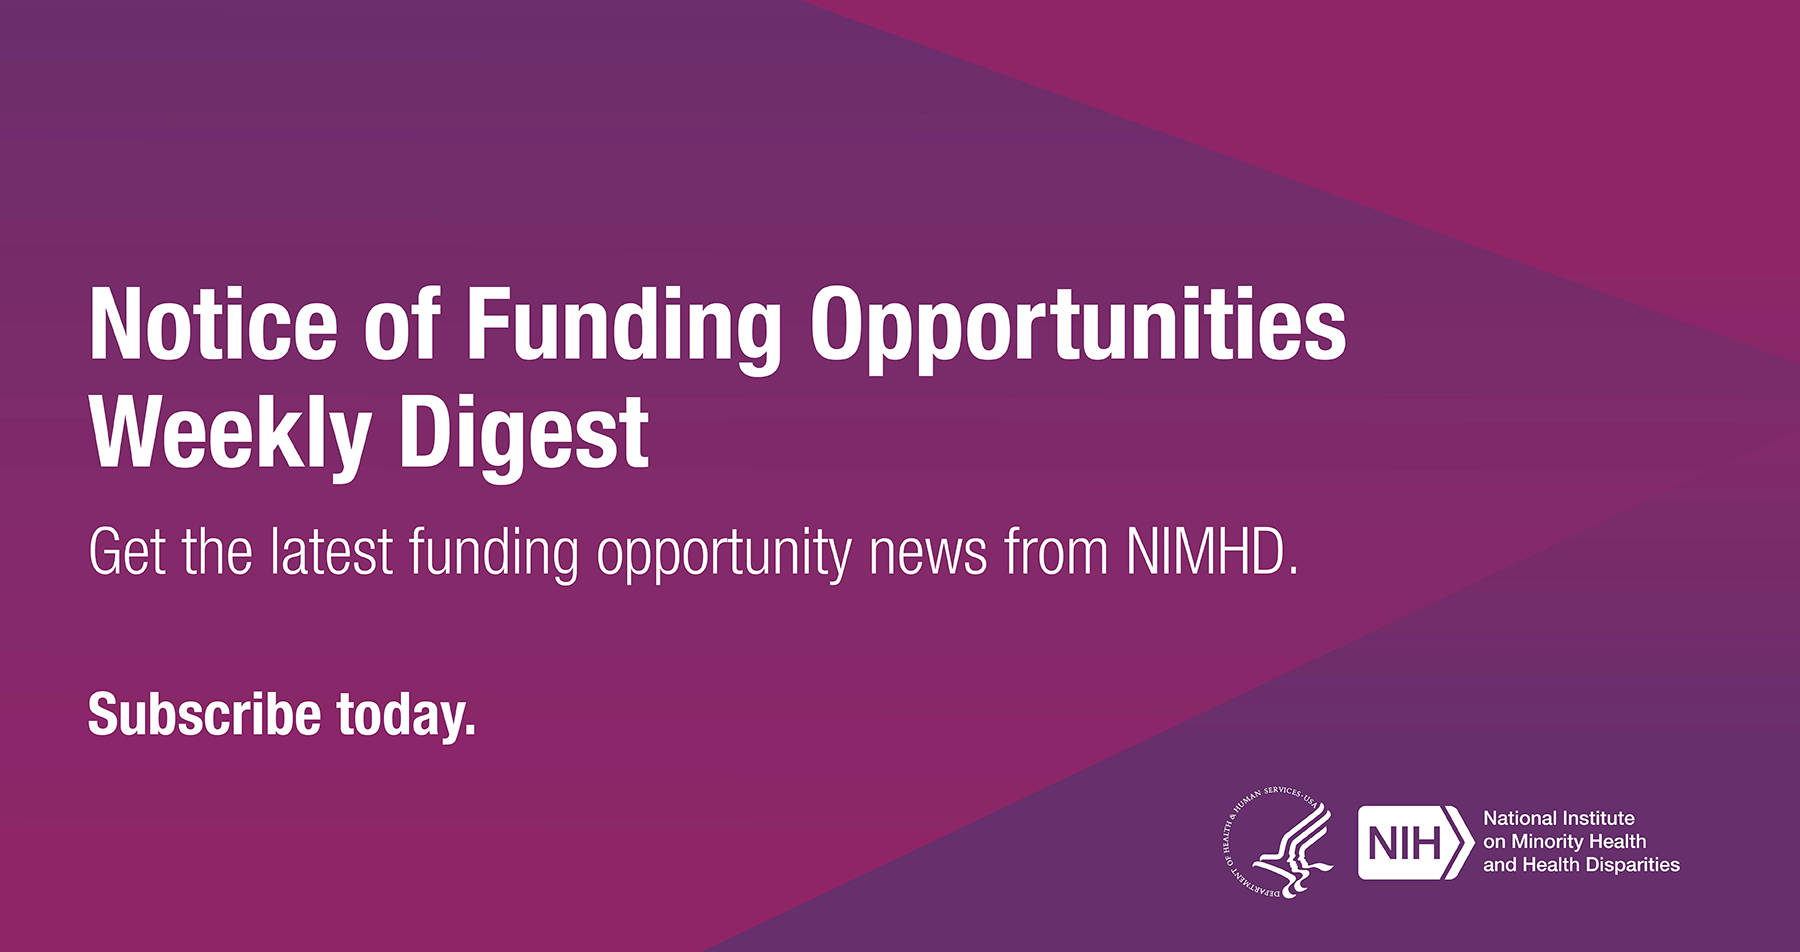 NIMHD Weekly Notice of Funding Opportunities Digest: Subscribe to get the latest funding news from NIMHD